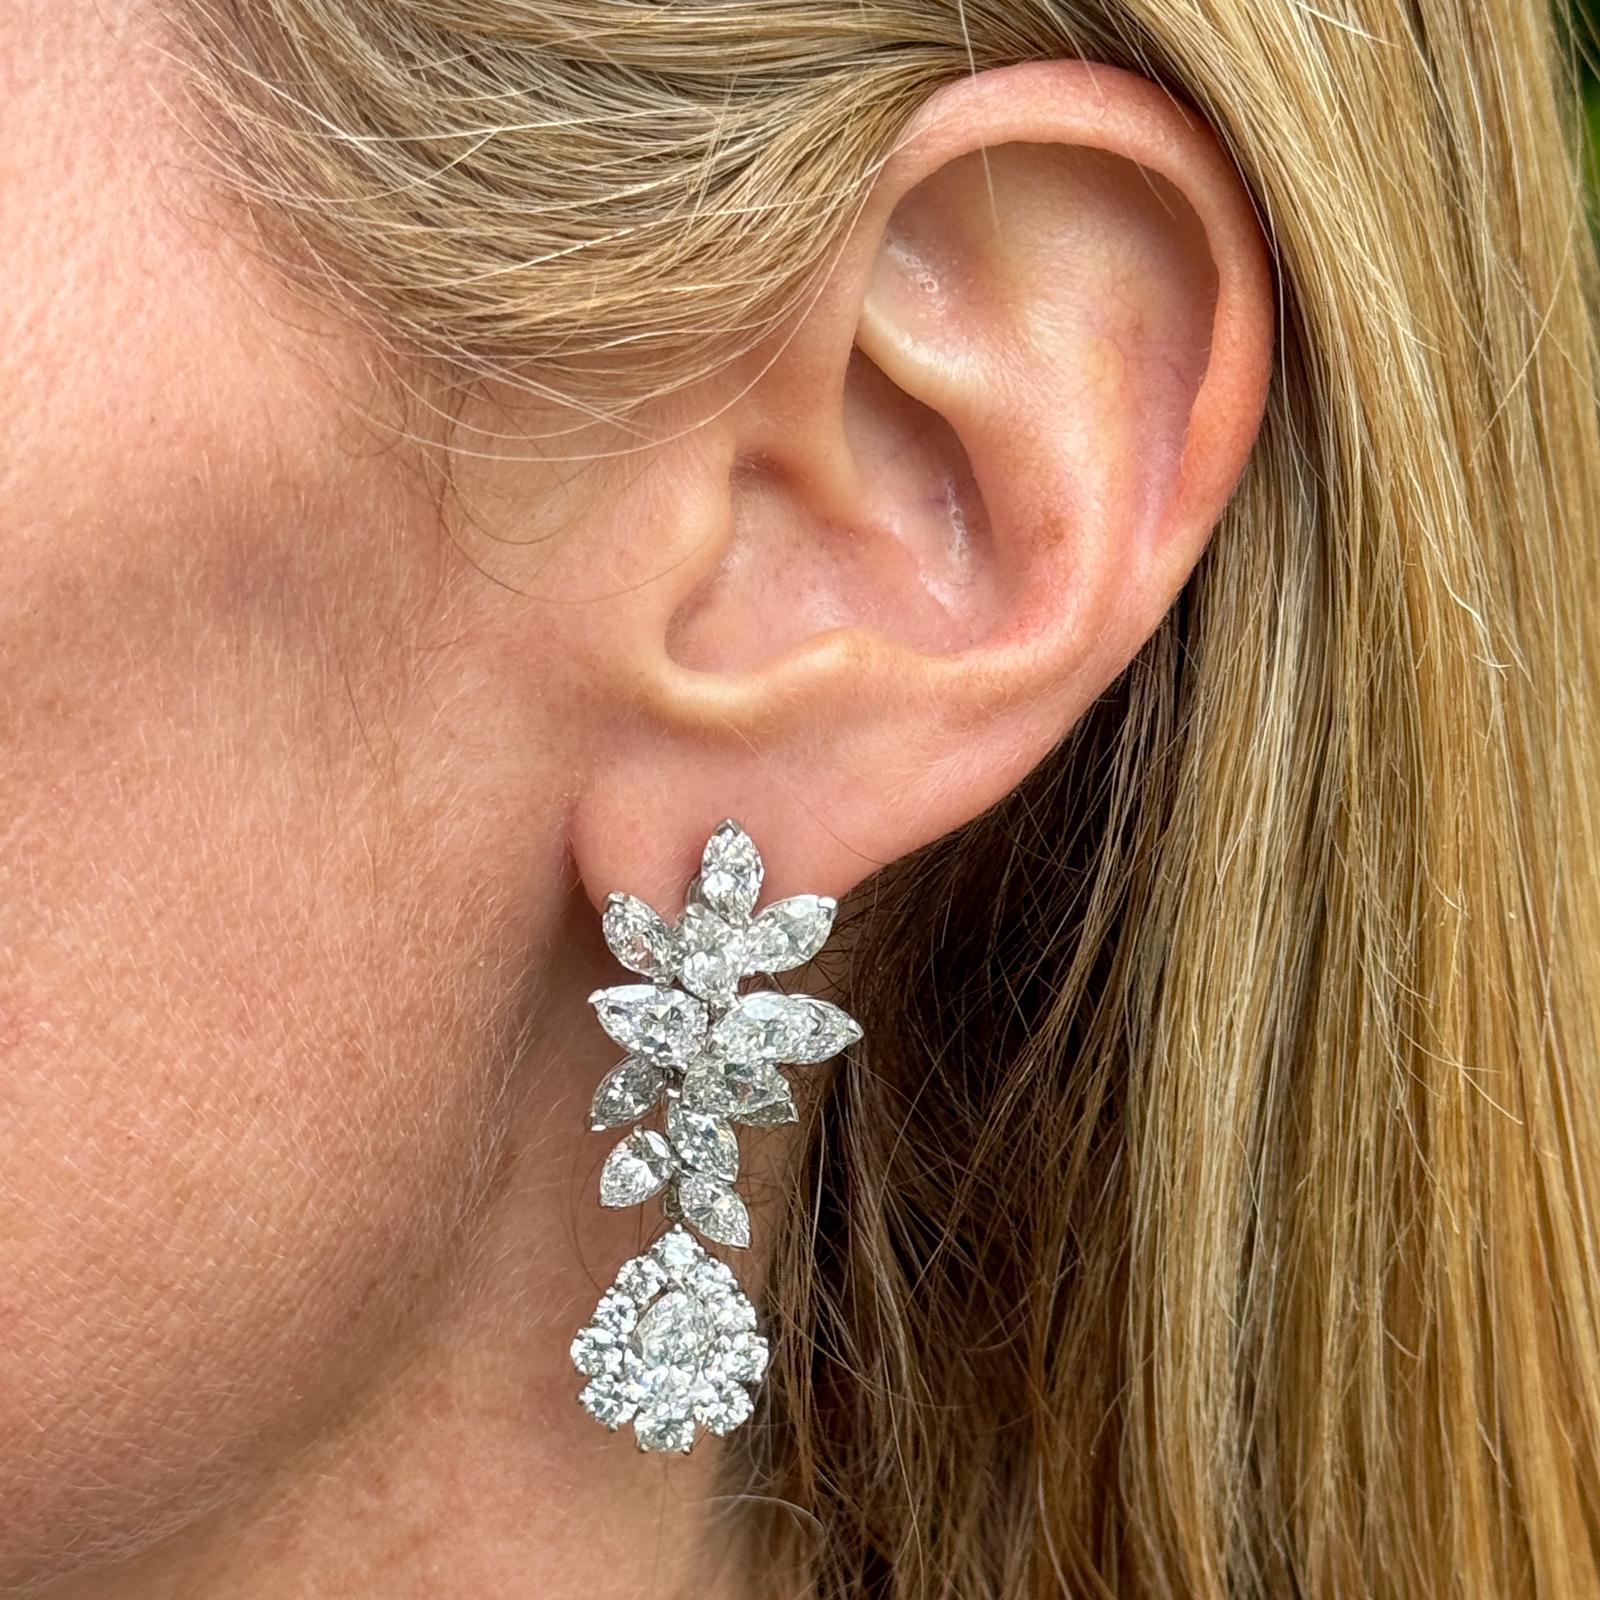 Stunning diamond drop earrings handcrafted by designer Oscar Heyman in platinum and 14 karat white gold. The custom earrings, circa 1970, feature 2 pear shape diamonds weighing 2.46 CTW. The pears can be worn alone as studs with retractable posts.